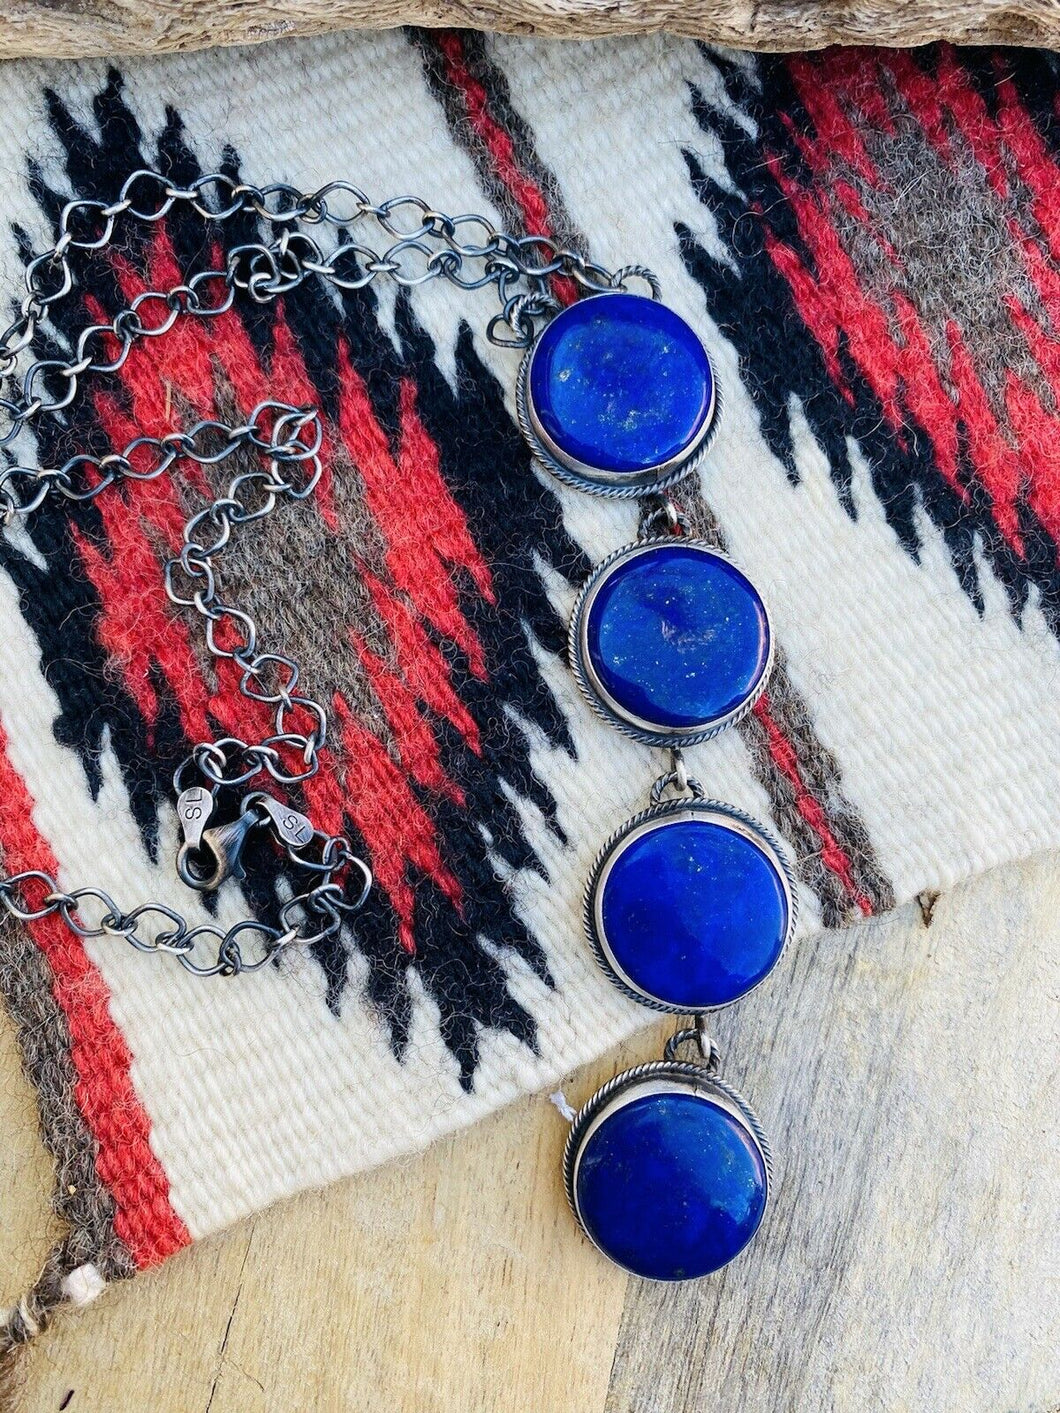 Navajo Sterling Silver & Lapis Lariat Necklace